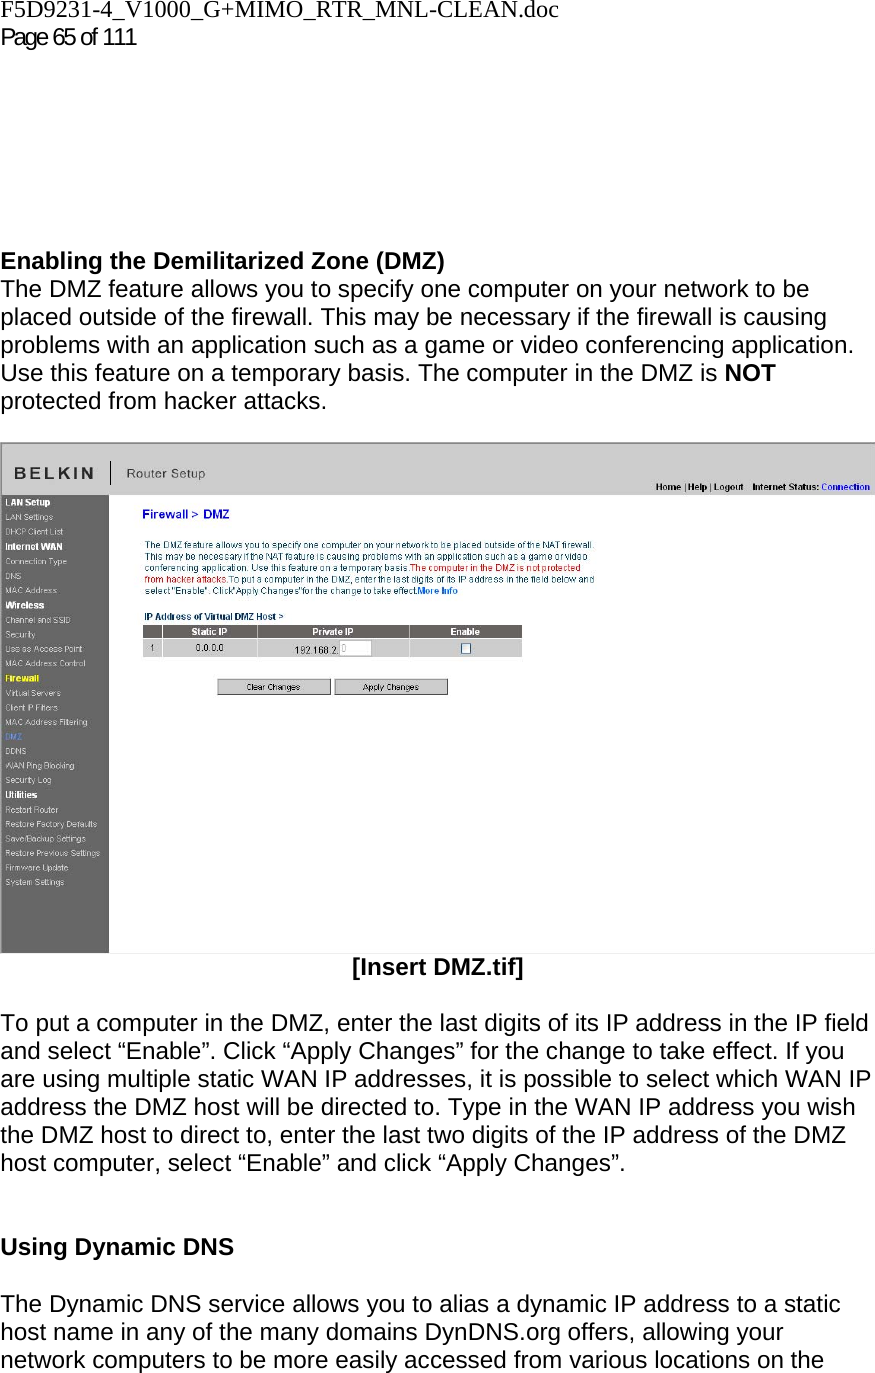 F5D9231-4_V1000_G+MIMO_RTR_MNL-CLEAN.doc  Page 65 of 111         Enabling the Demilitarized Zone (DMZ)  The DMZ feature allows you to specify one computer on your network to be placed outside of the firewall. This may be necessary if the firewall is causing problems with an application such as a game or video conferencing application. Use this feature on a temporary basis. The computer in the DMZ is NOT protected from hacker attacks.    [Insert DMZ.tif]  To put a computer in the DMZ, enter the last digits of its IP address in the IP field and select “Enable”. Click “Apply Changes” for the change to take effect. If you are using multiple static WAN IP addresses, it is possible to select which WAN IP address the DMZ host will be directed to. Type in the WAN IP address you wish the DMZ host to direct to, enter the last two digits of the IP address of the DMZ host computer, select “Enable” and click “Apply Changes”.   Using Dynamic DNS  The Dynamic DNS service allows you to alias a dynamic IP address to a static host name in any of the many domains DynDNS.org offers, allowing your network computers to be more easily accessed from various locations on the 